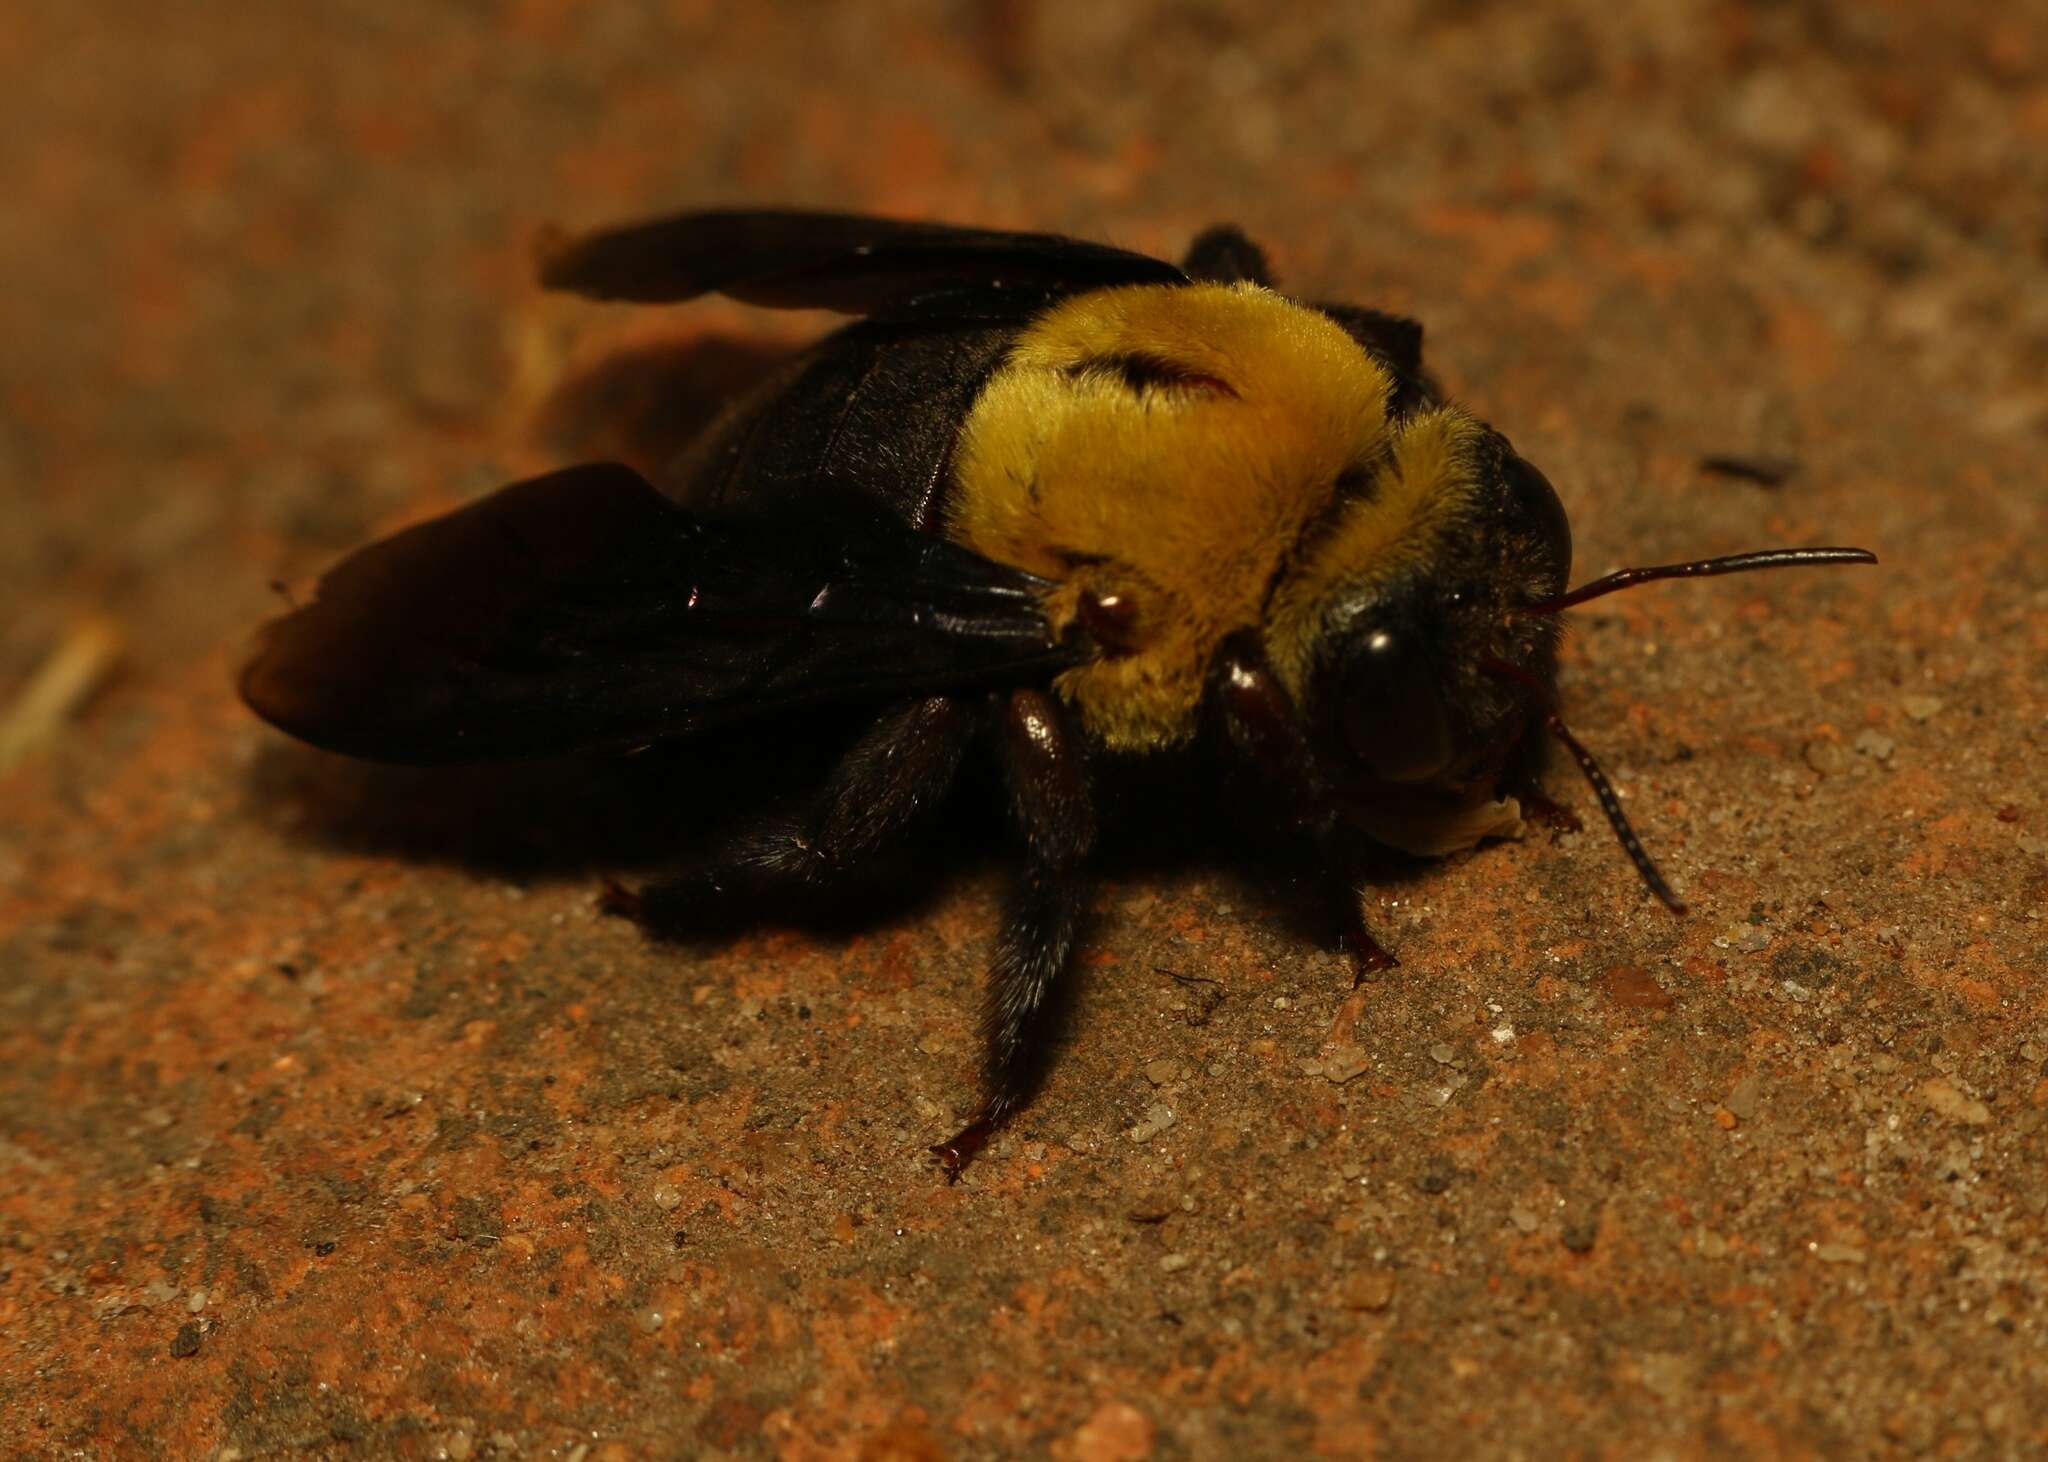 Image of Xylocopa ruficornis Fabricius 1804